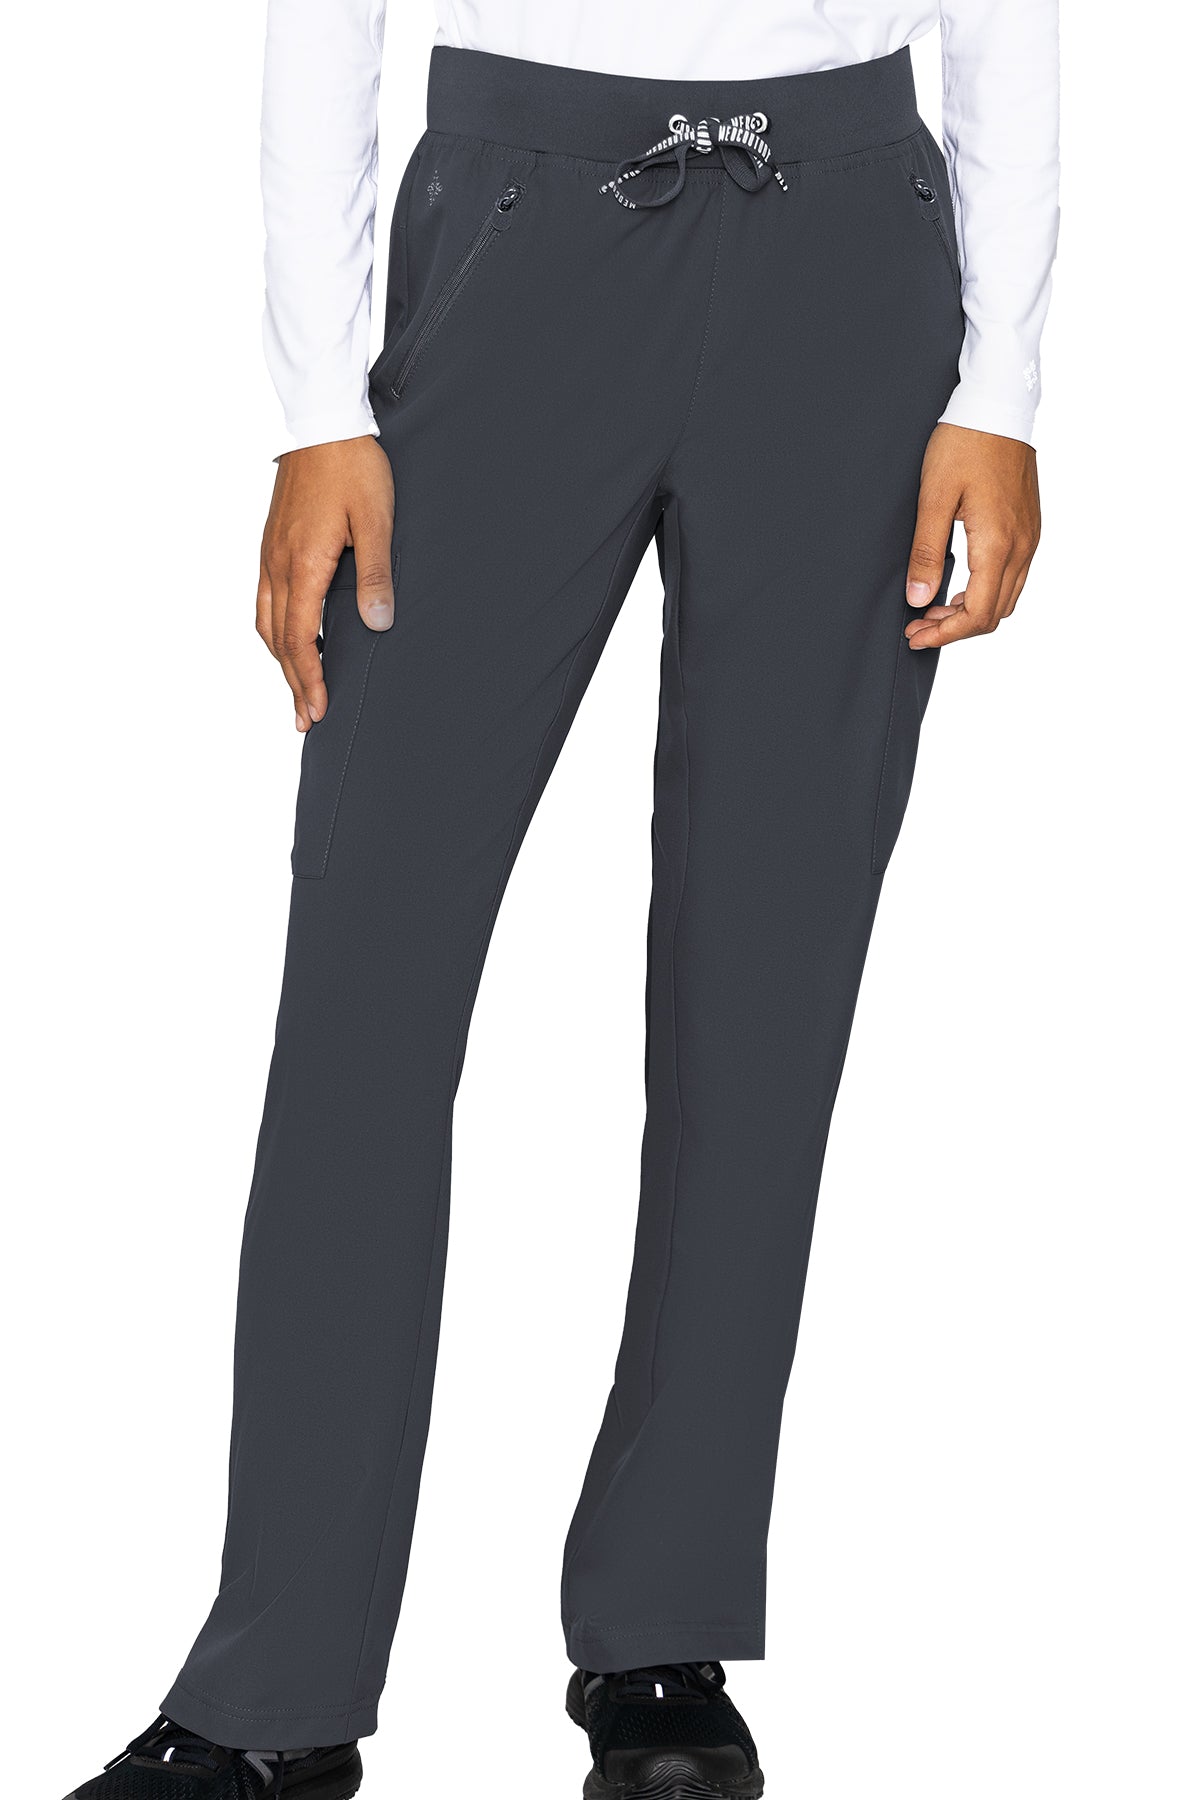 Med Couture 2702 Insight Women's Zipper Pocket Pant Pewter